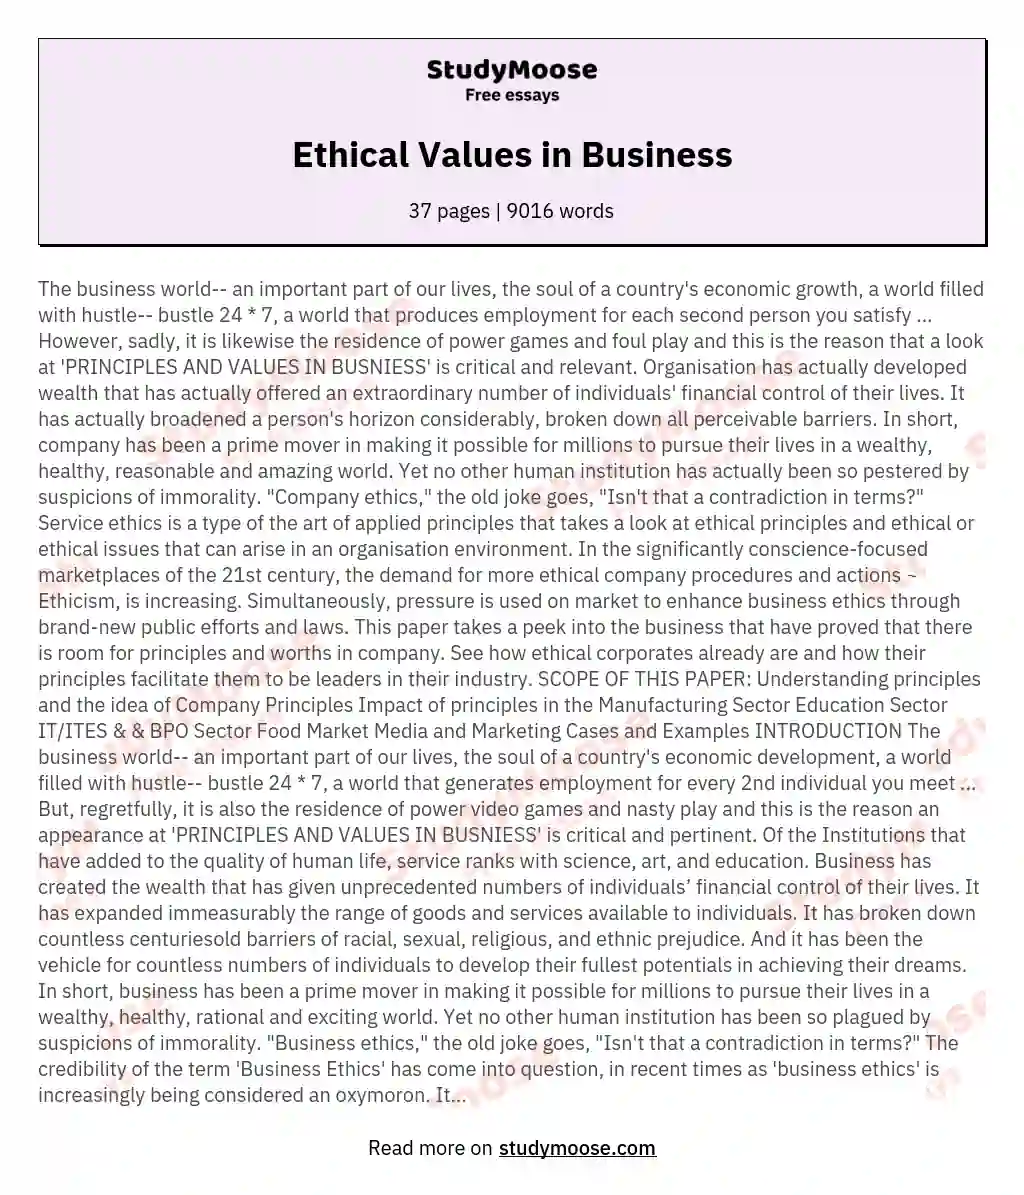 Ethical Values in Business essay